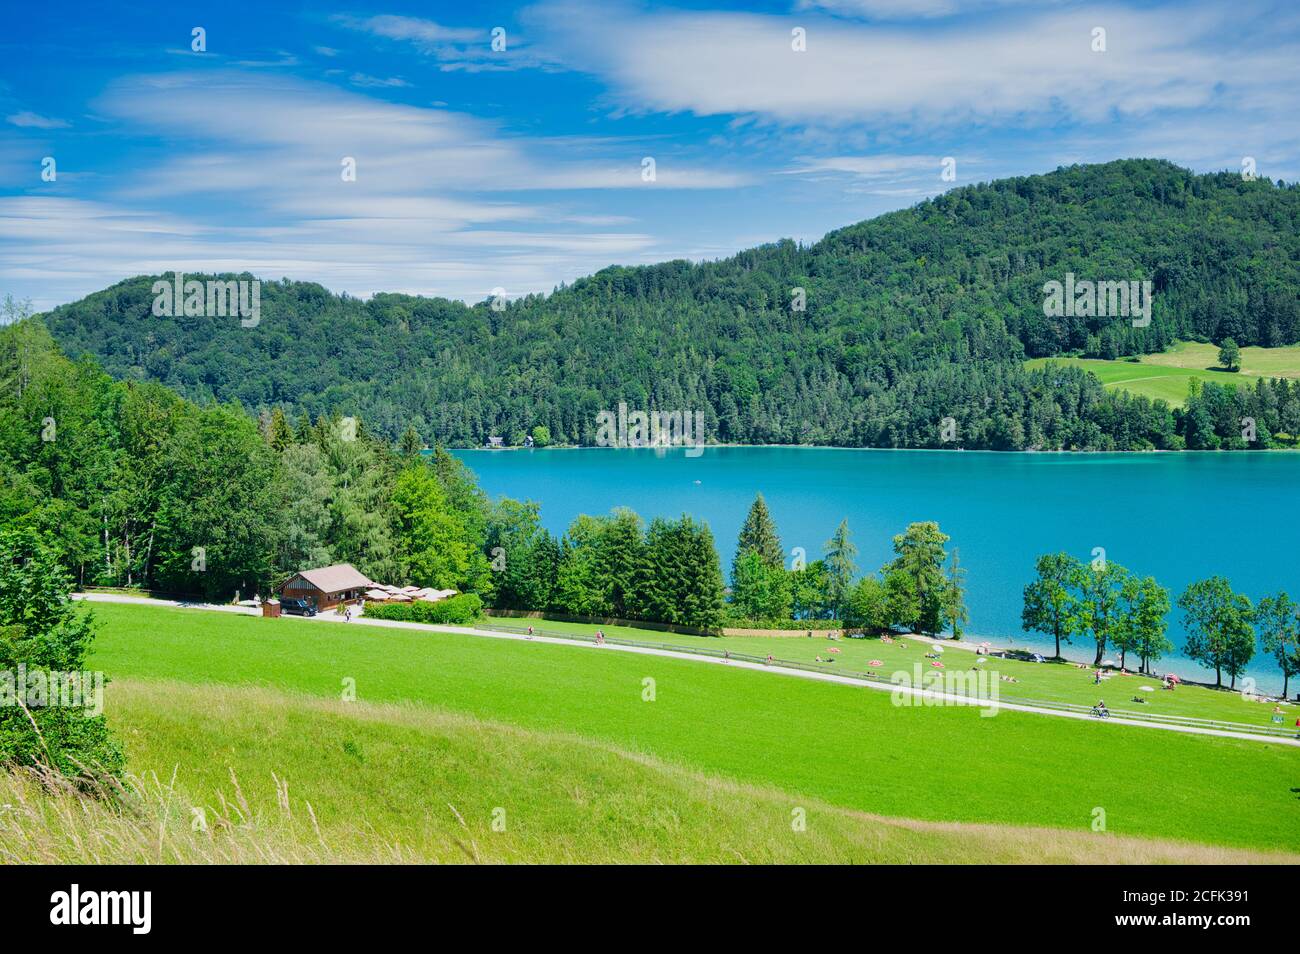 Fuschl am See, Austria - July 09, 2020: the lake Fuschlsee in Austria in the summer Stock Photo